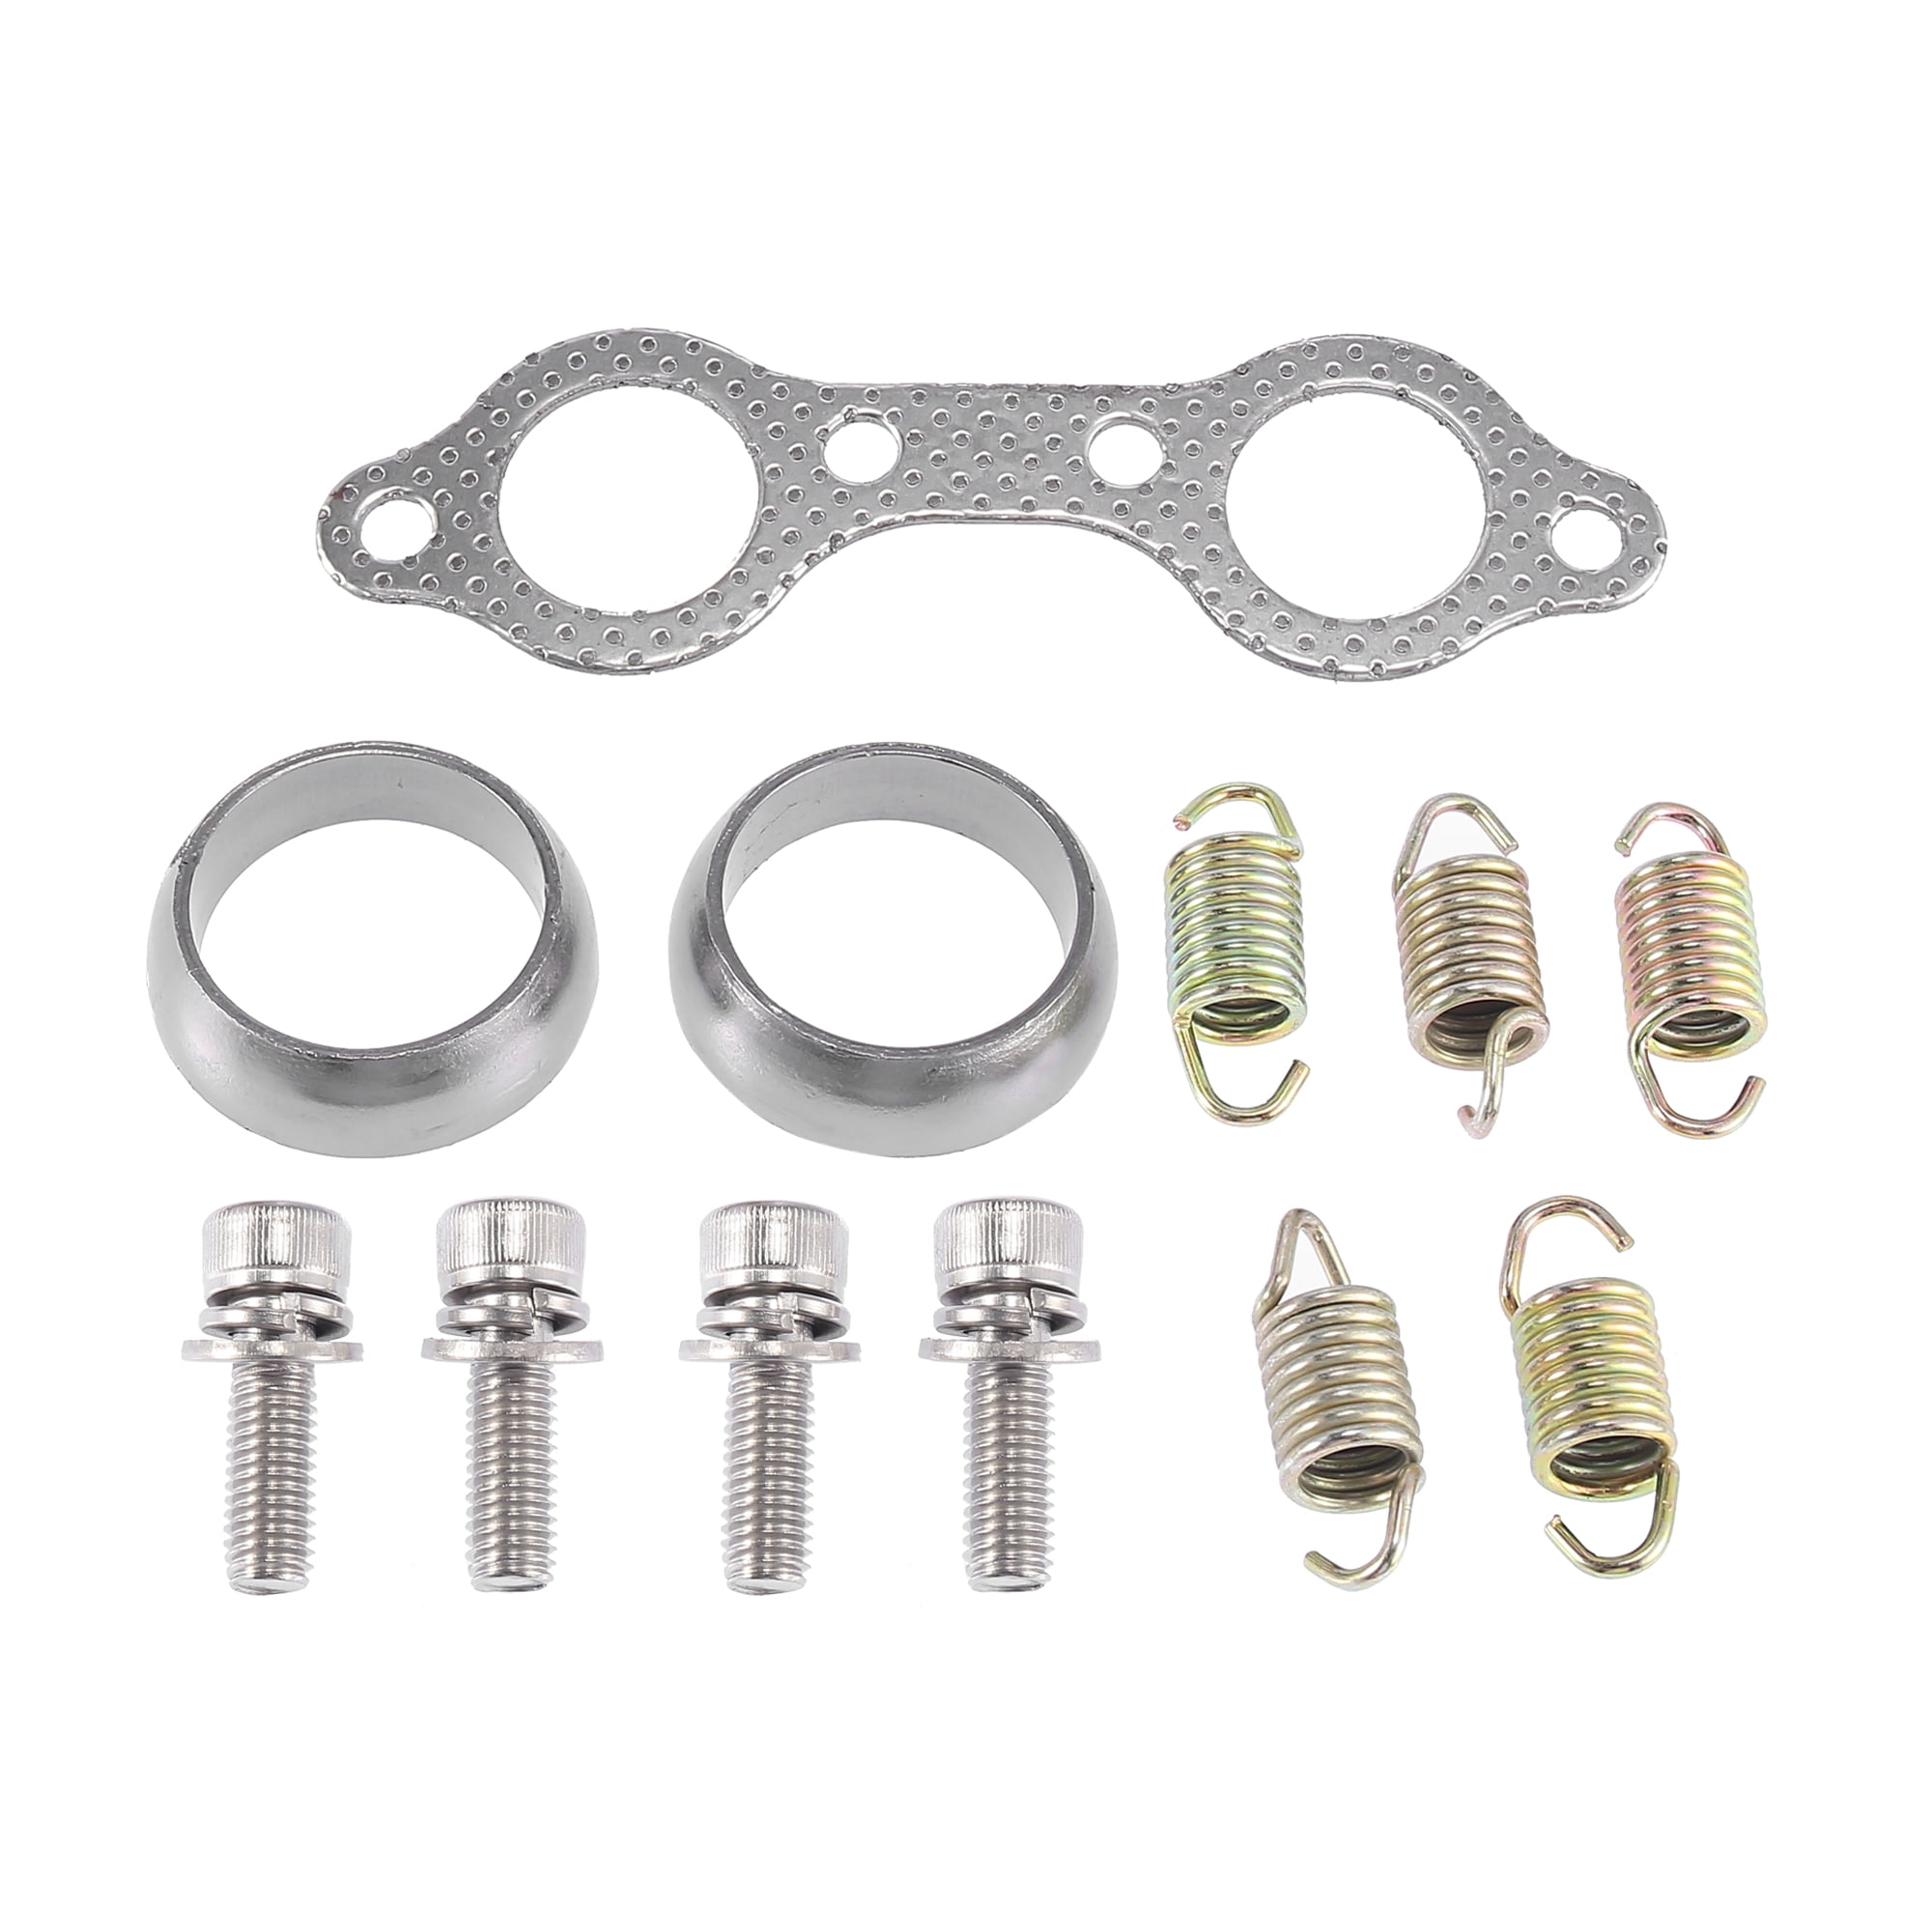 Exhaust Pipe Manifold Gasket and Spring Bolts Rebuild Kit for Polaris  Sportsman 600 700 3610047 5811511